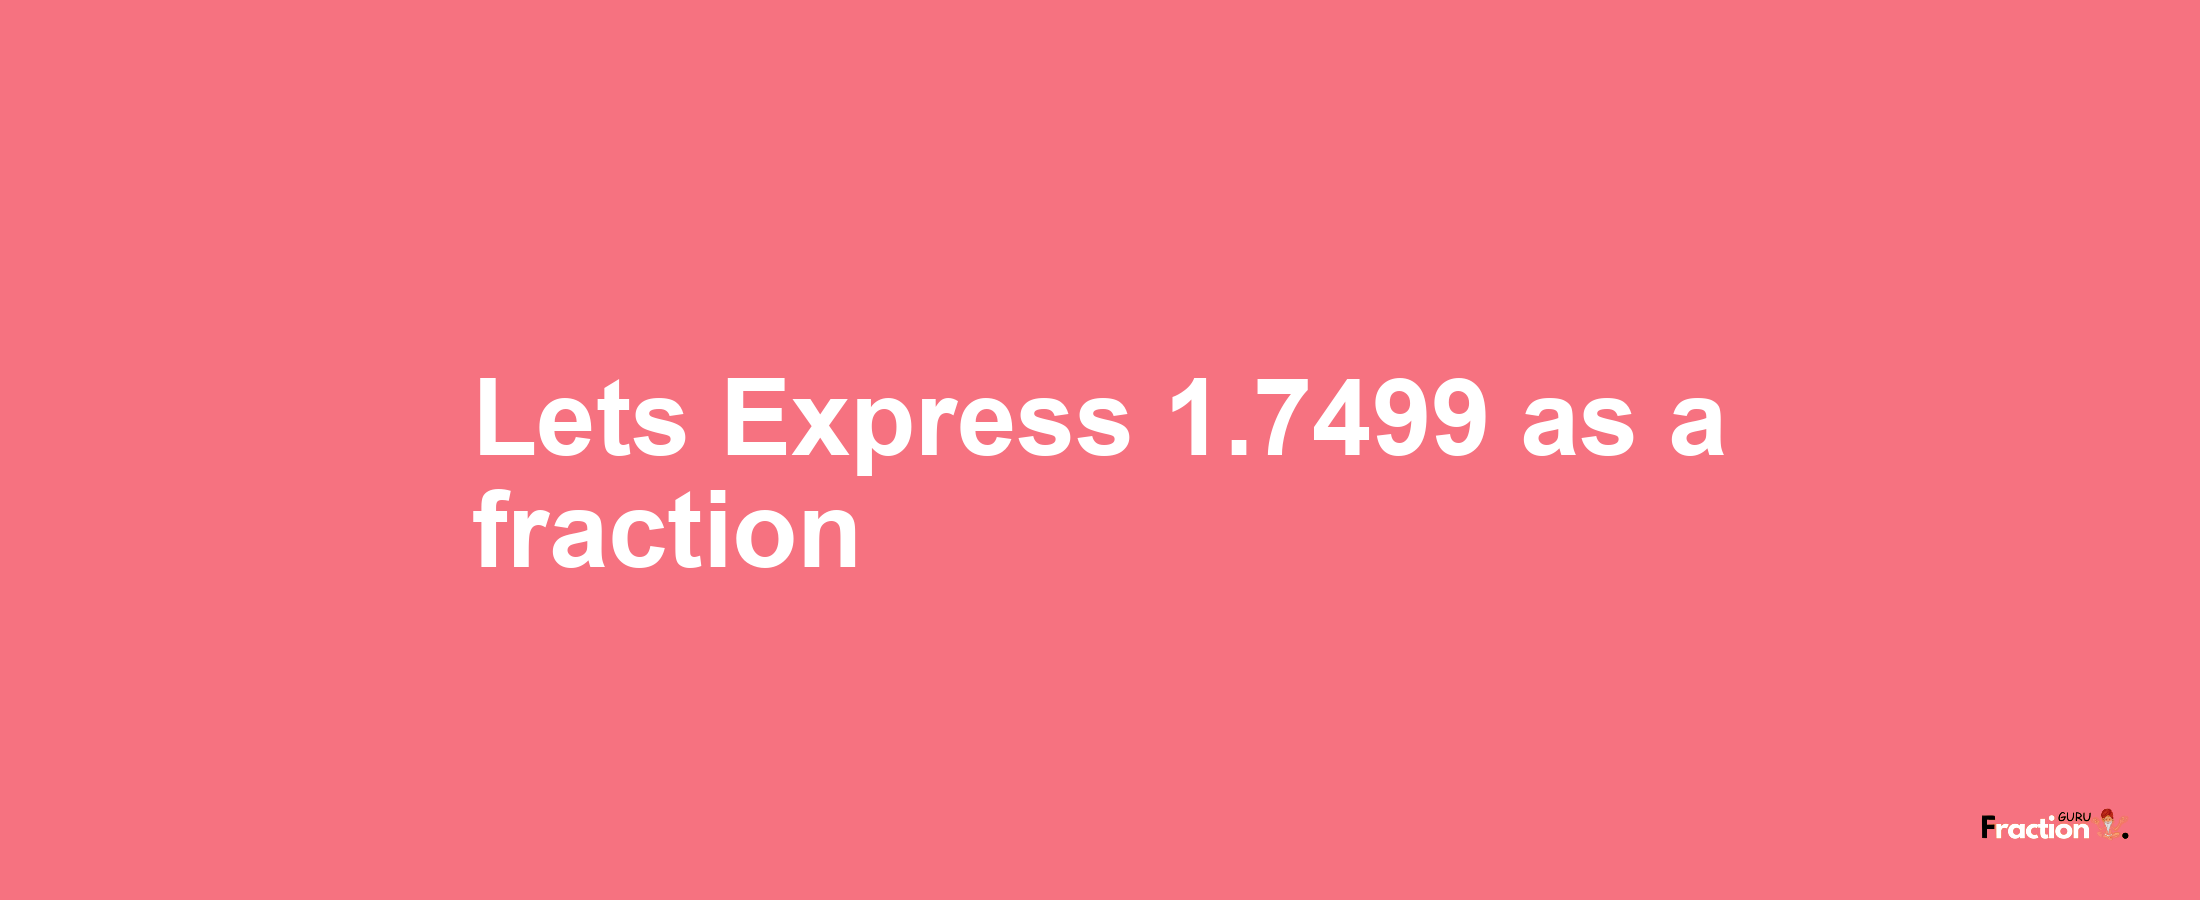 Lets Express 1.7499 as afraction